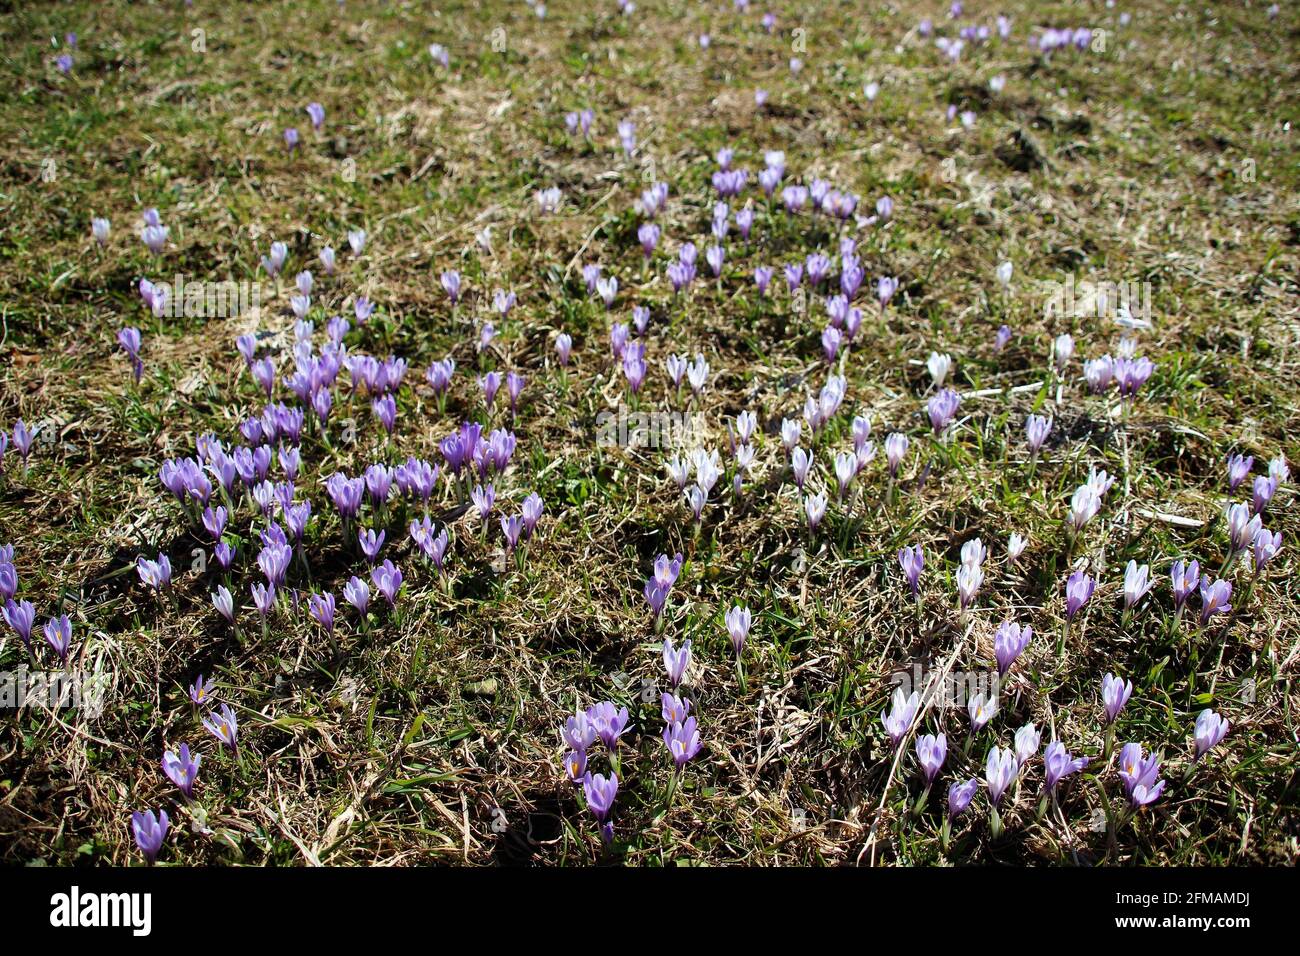 Crocus meadow in the humpback meadows near Mittenwald, atmospheric, Europe, Germany, Bavaria, Upper Bavaria, Werdenfelser Land, Isar valley Stock Photo